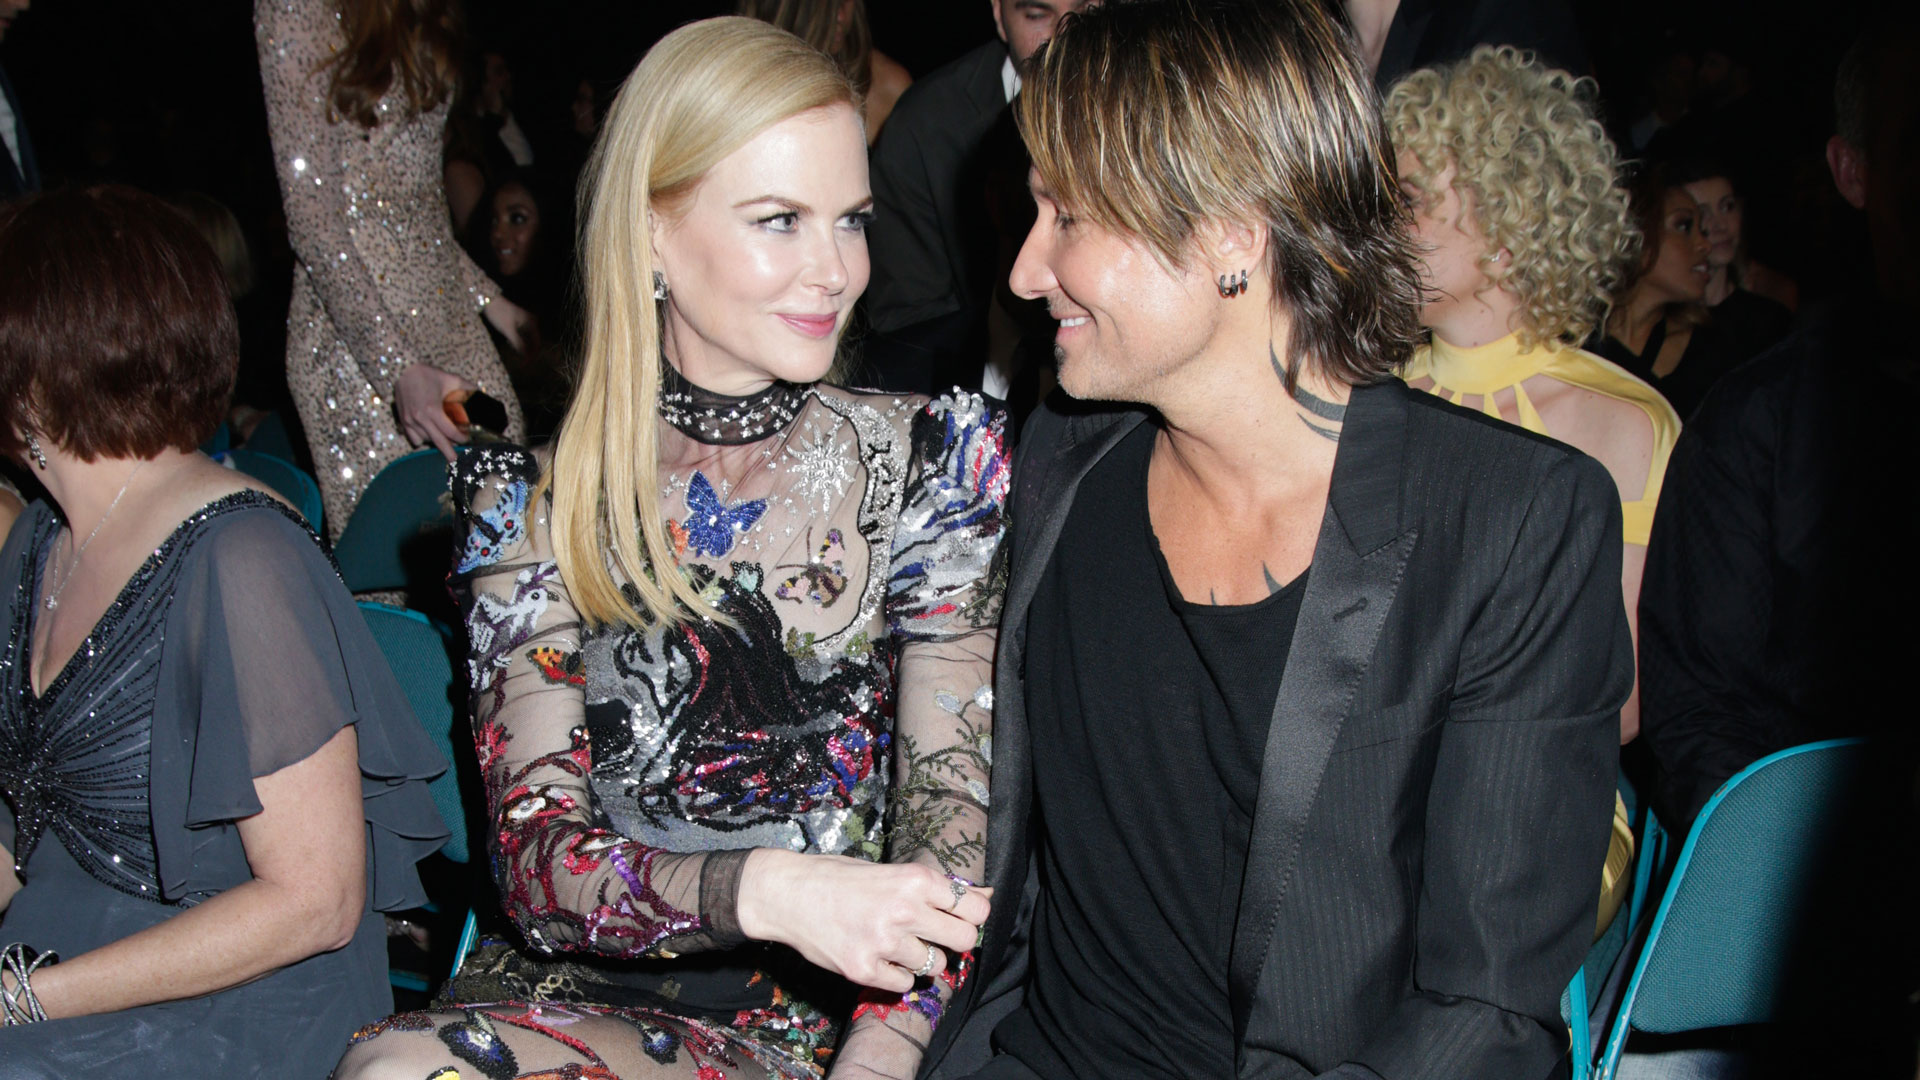 Actress Nicole Kidman exchanged loving glances with her husband, singer Keith Urban, before he took to the ACM stage to perform 